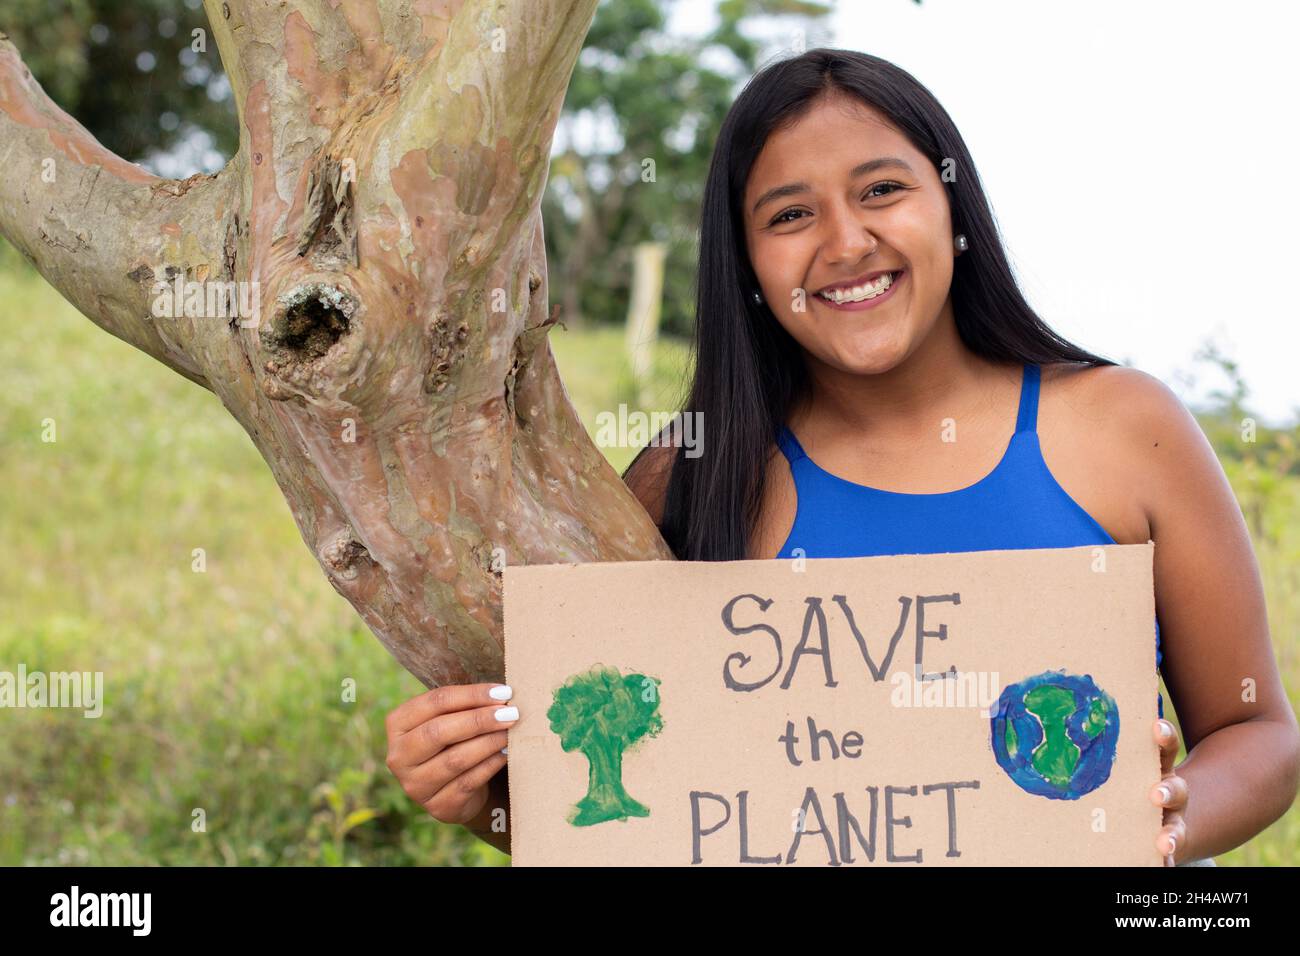 poster on save trees with slogan